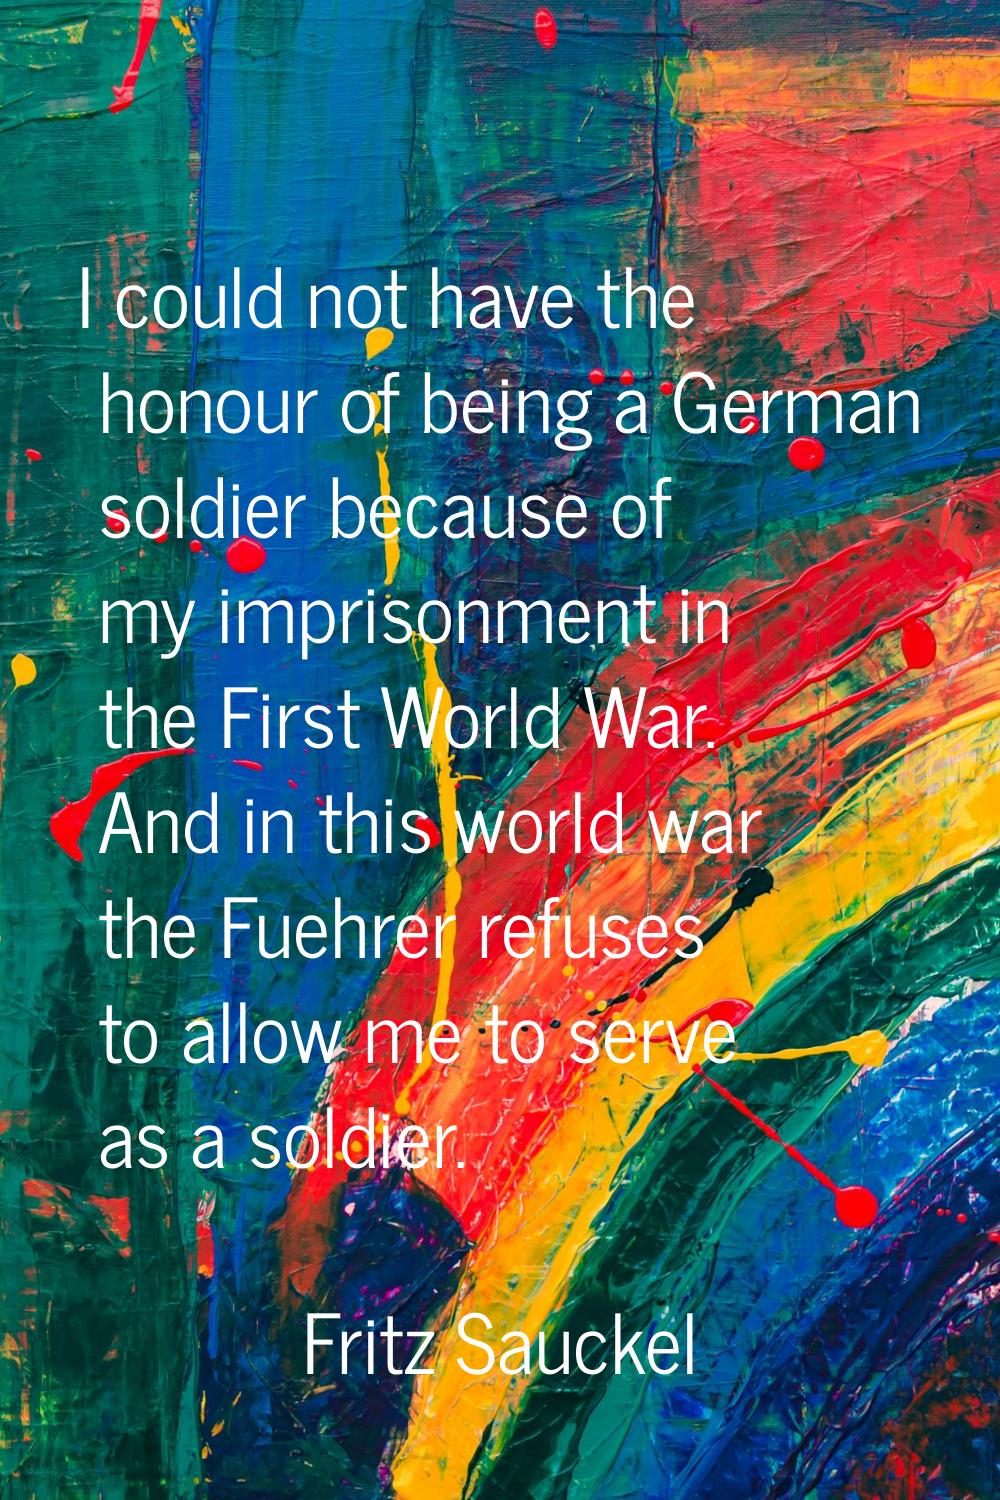 I could not have the honour of being a German soldier because of my imprisonment in the First World